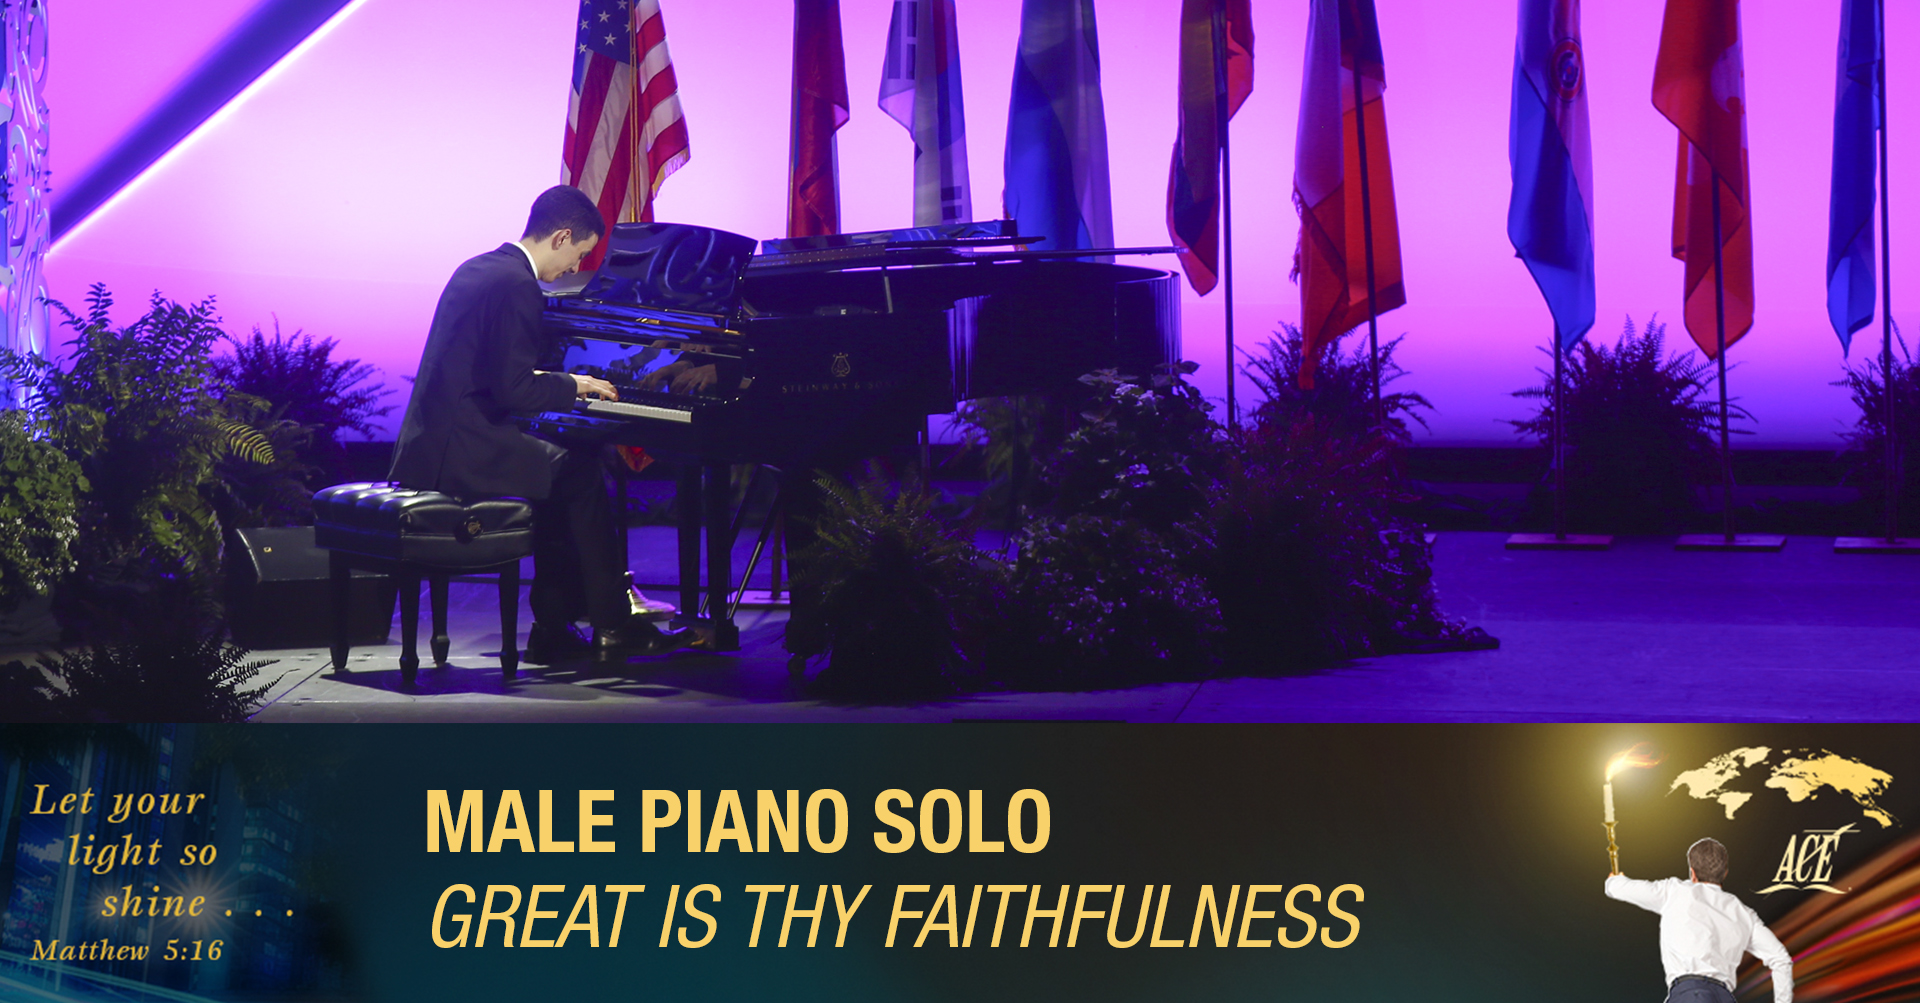 Male Piano Solo, "Great Is Thy Faithfulness" - ISC 2019